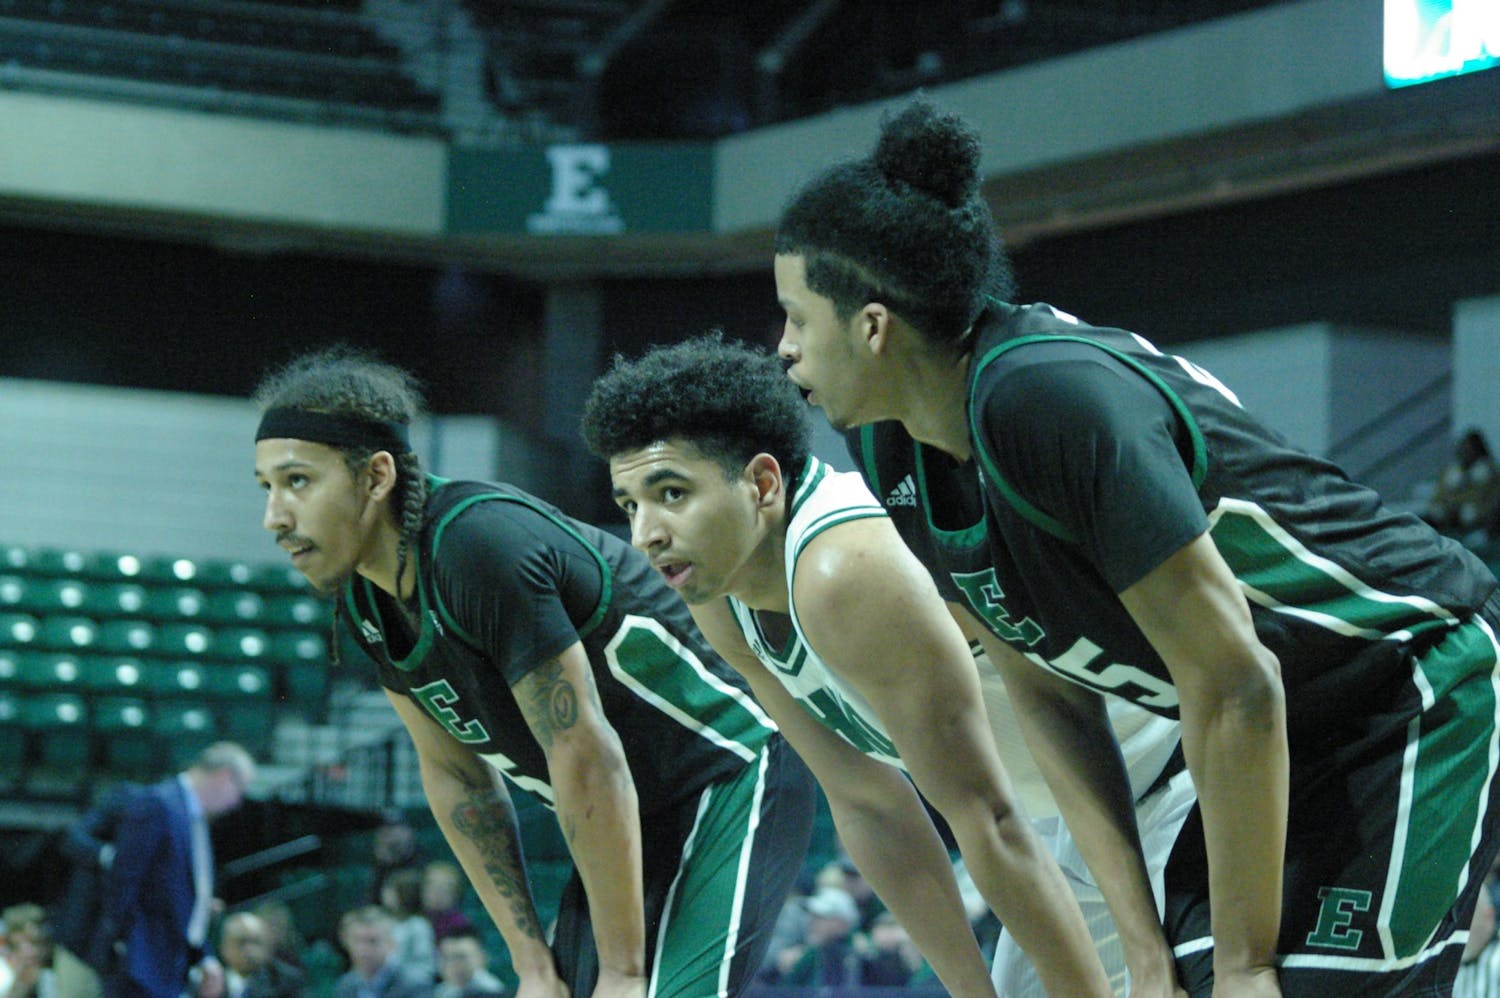 EMU falls to Ohio for fifth straight loss